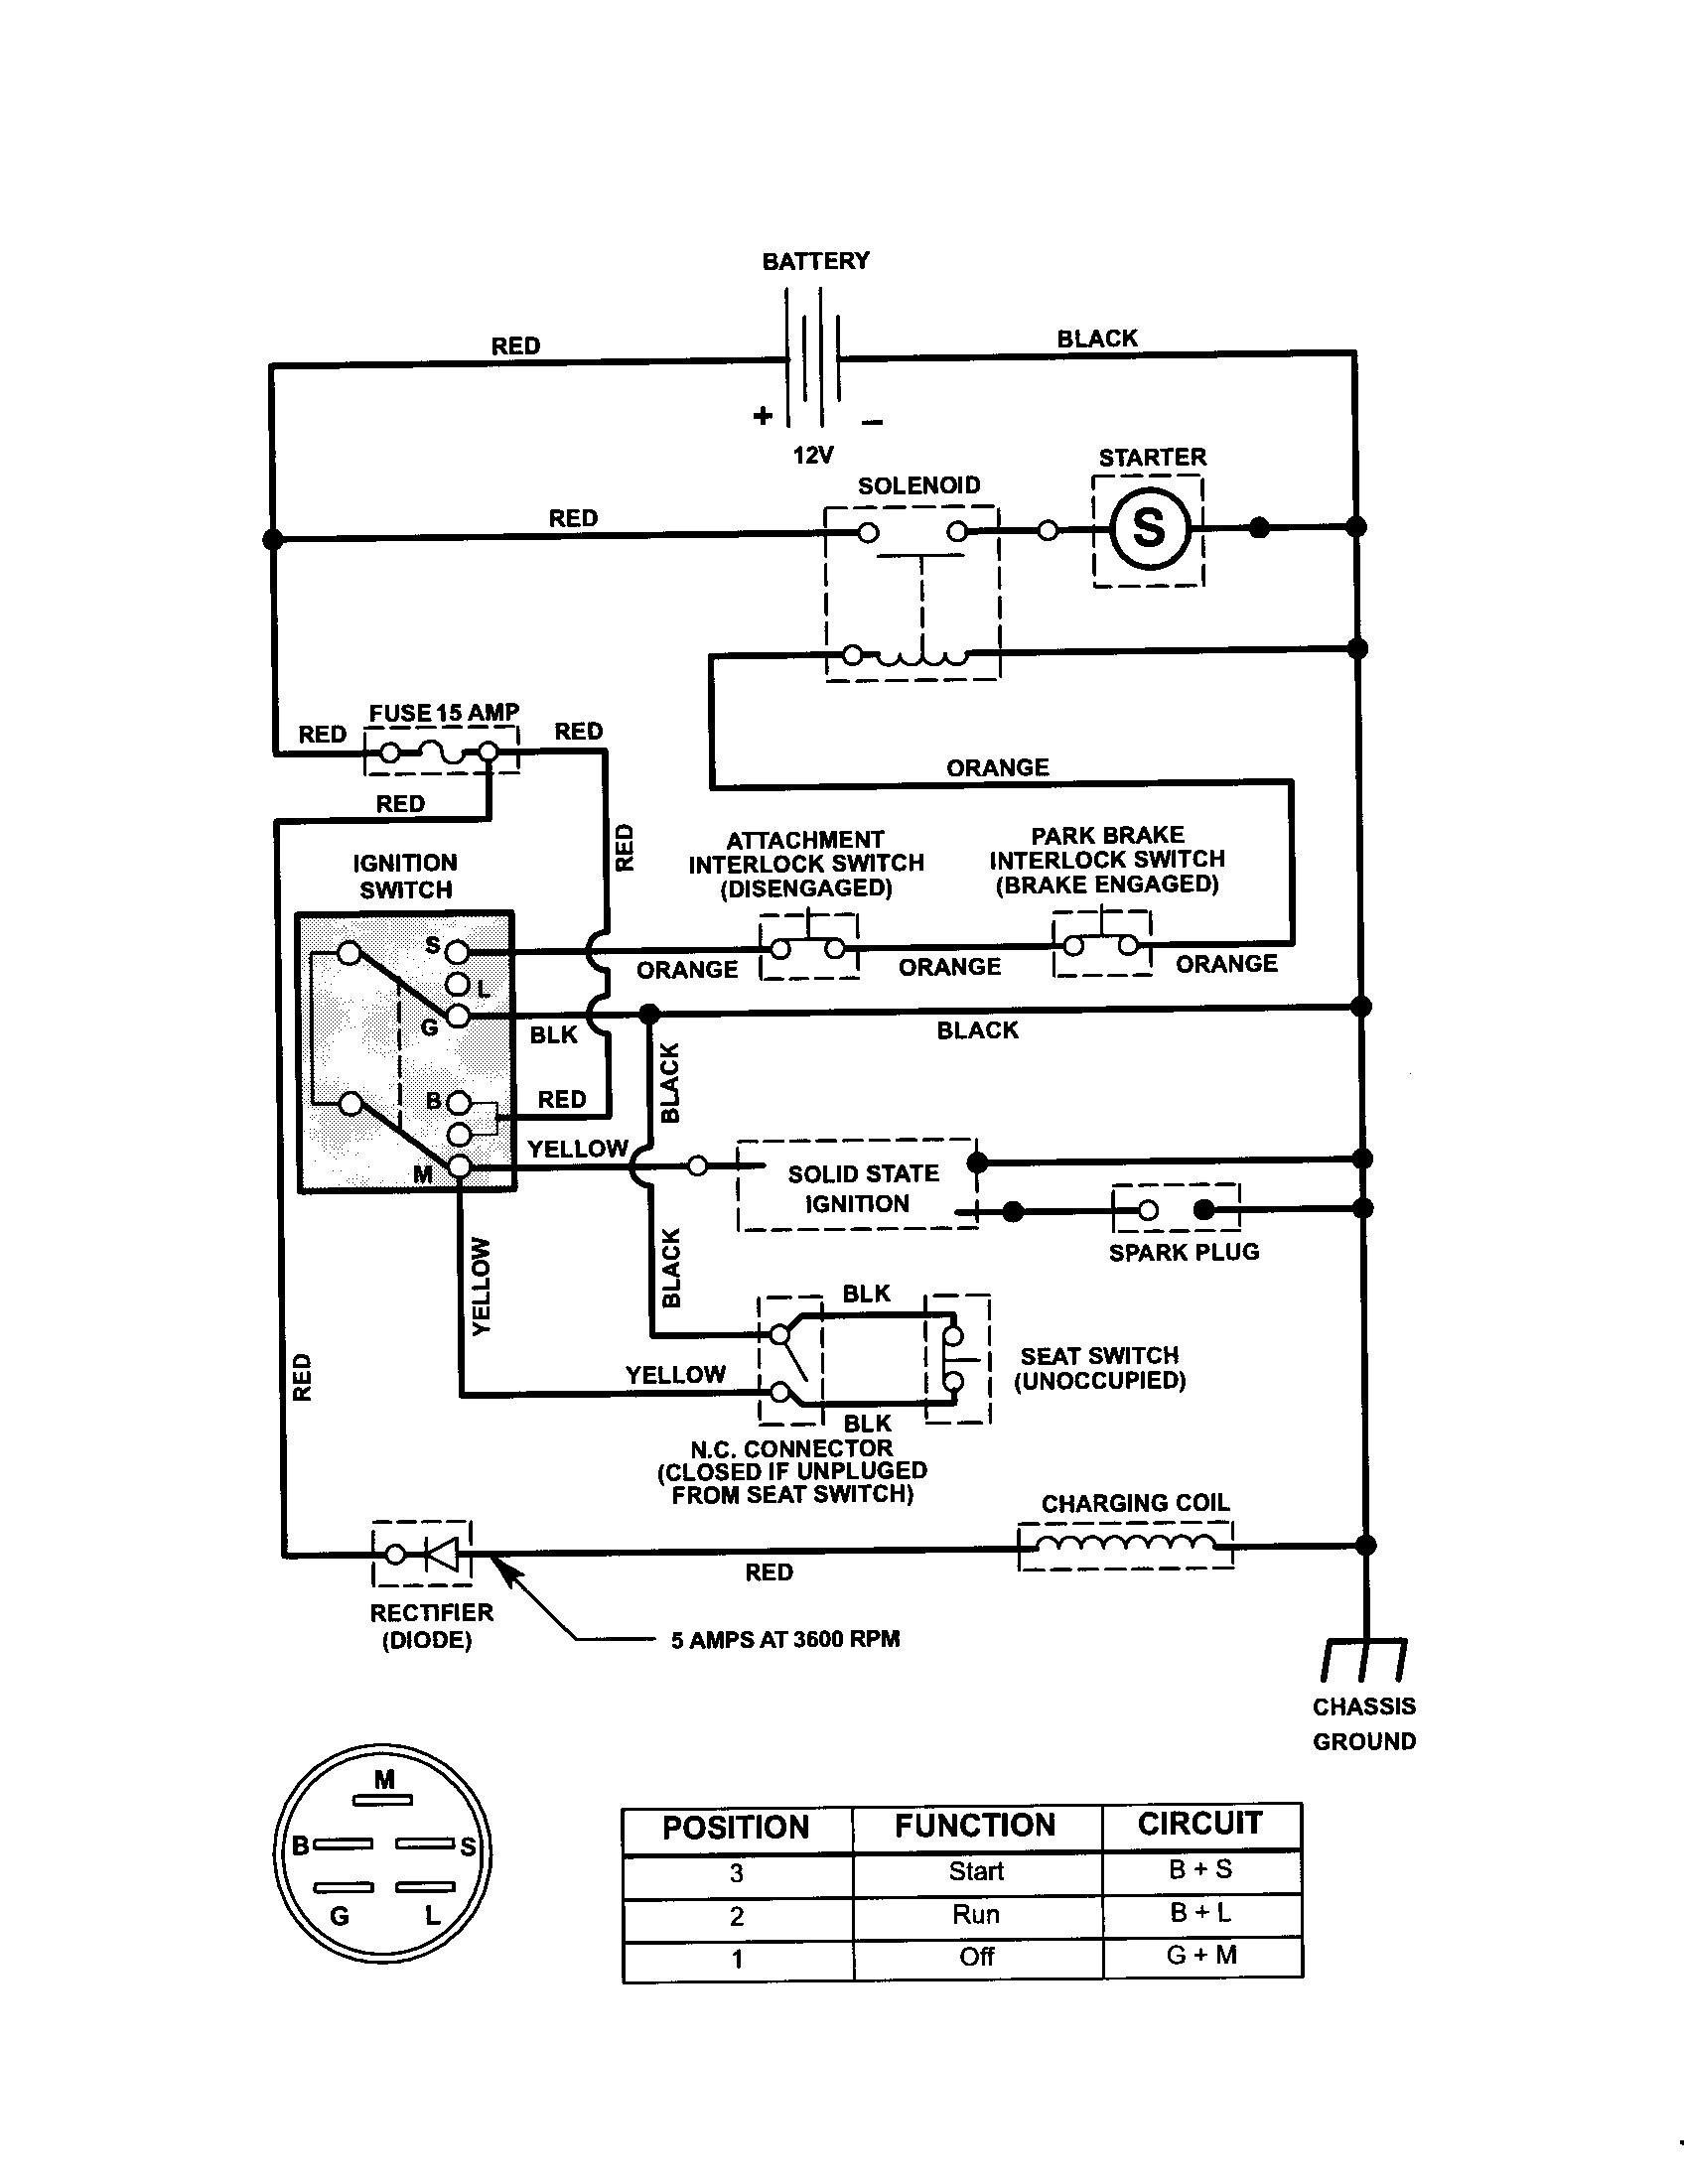 Ge 300 Line Control Wiring Diagram Best Craftsman Riding Mower Electrical Diagram Awesome Ge